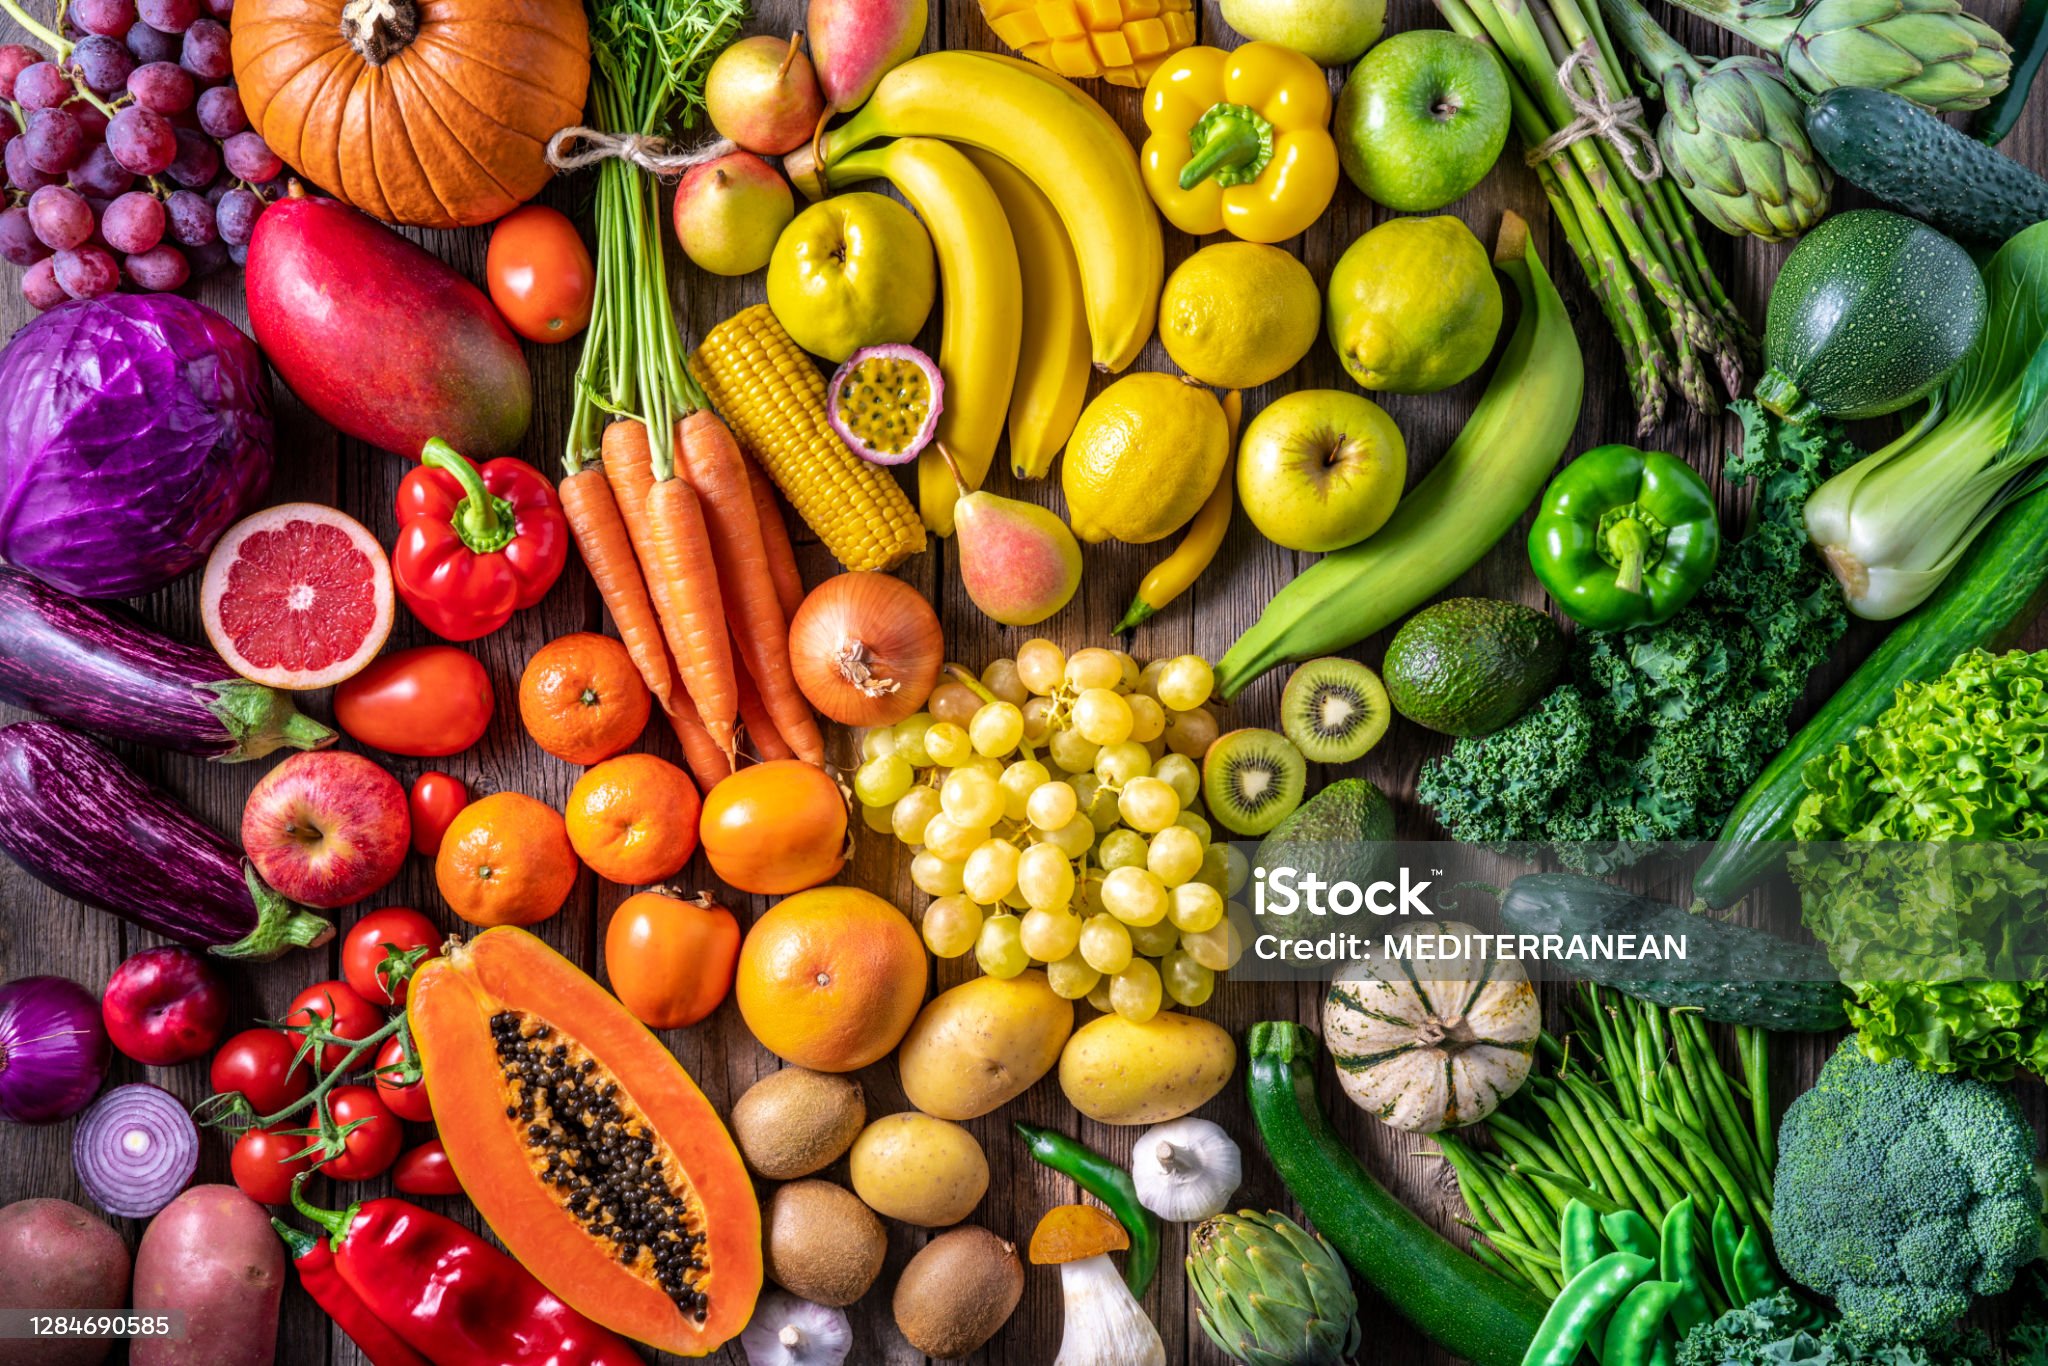 Colorful vegetables and fruits vegan food in rainbow colors Colorful vegetables and fruits vegan food in rainbow colors arrangement full frame Vegetable Stock Photo